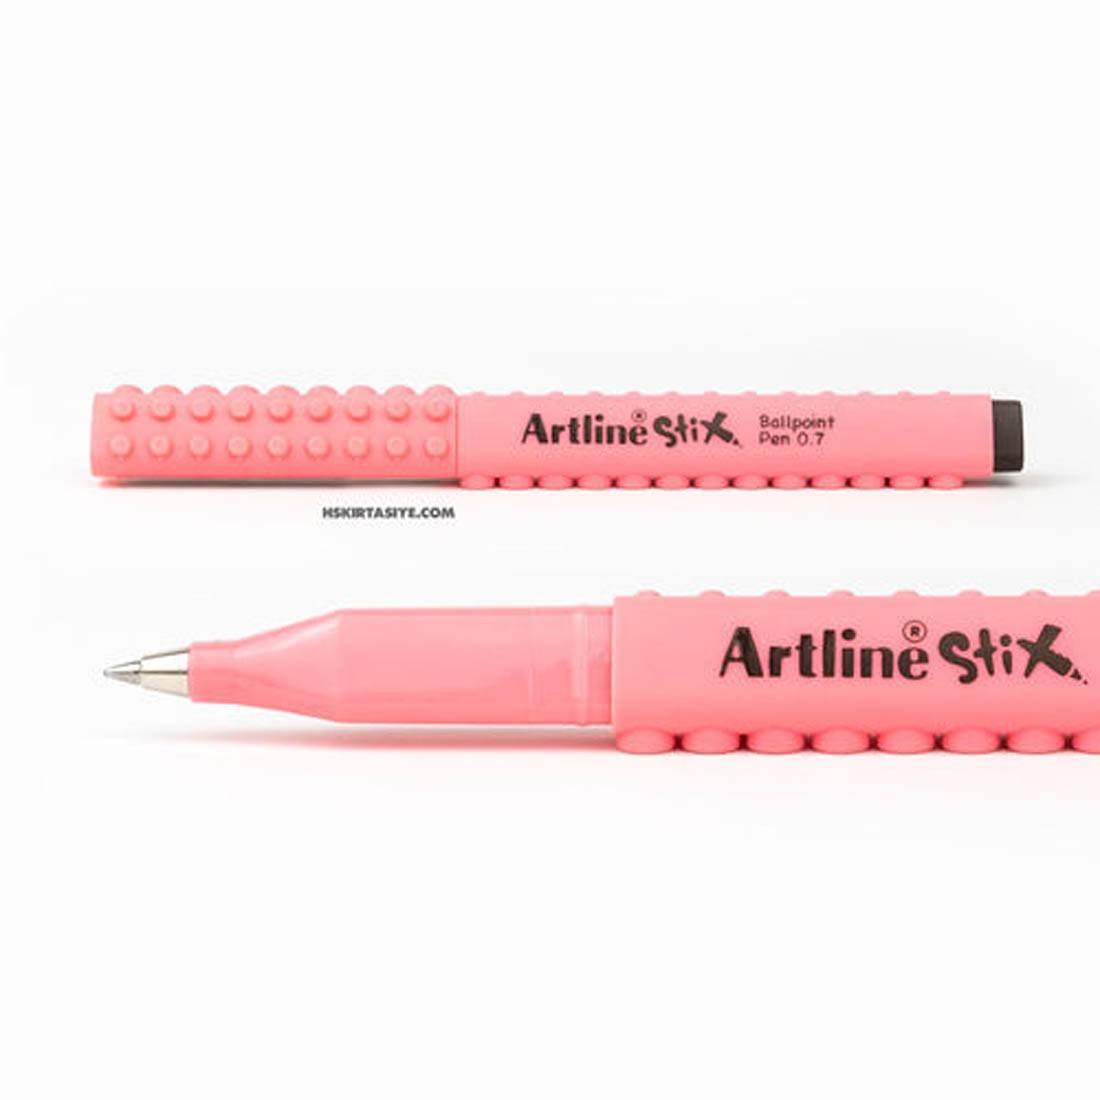 Artline Stix Are the Legos of Pens - Lettering with Lesley